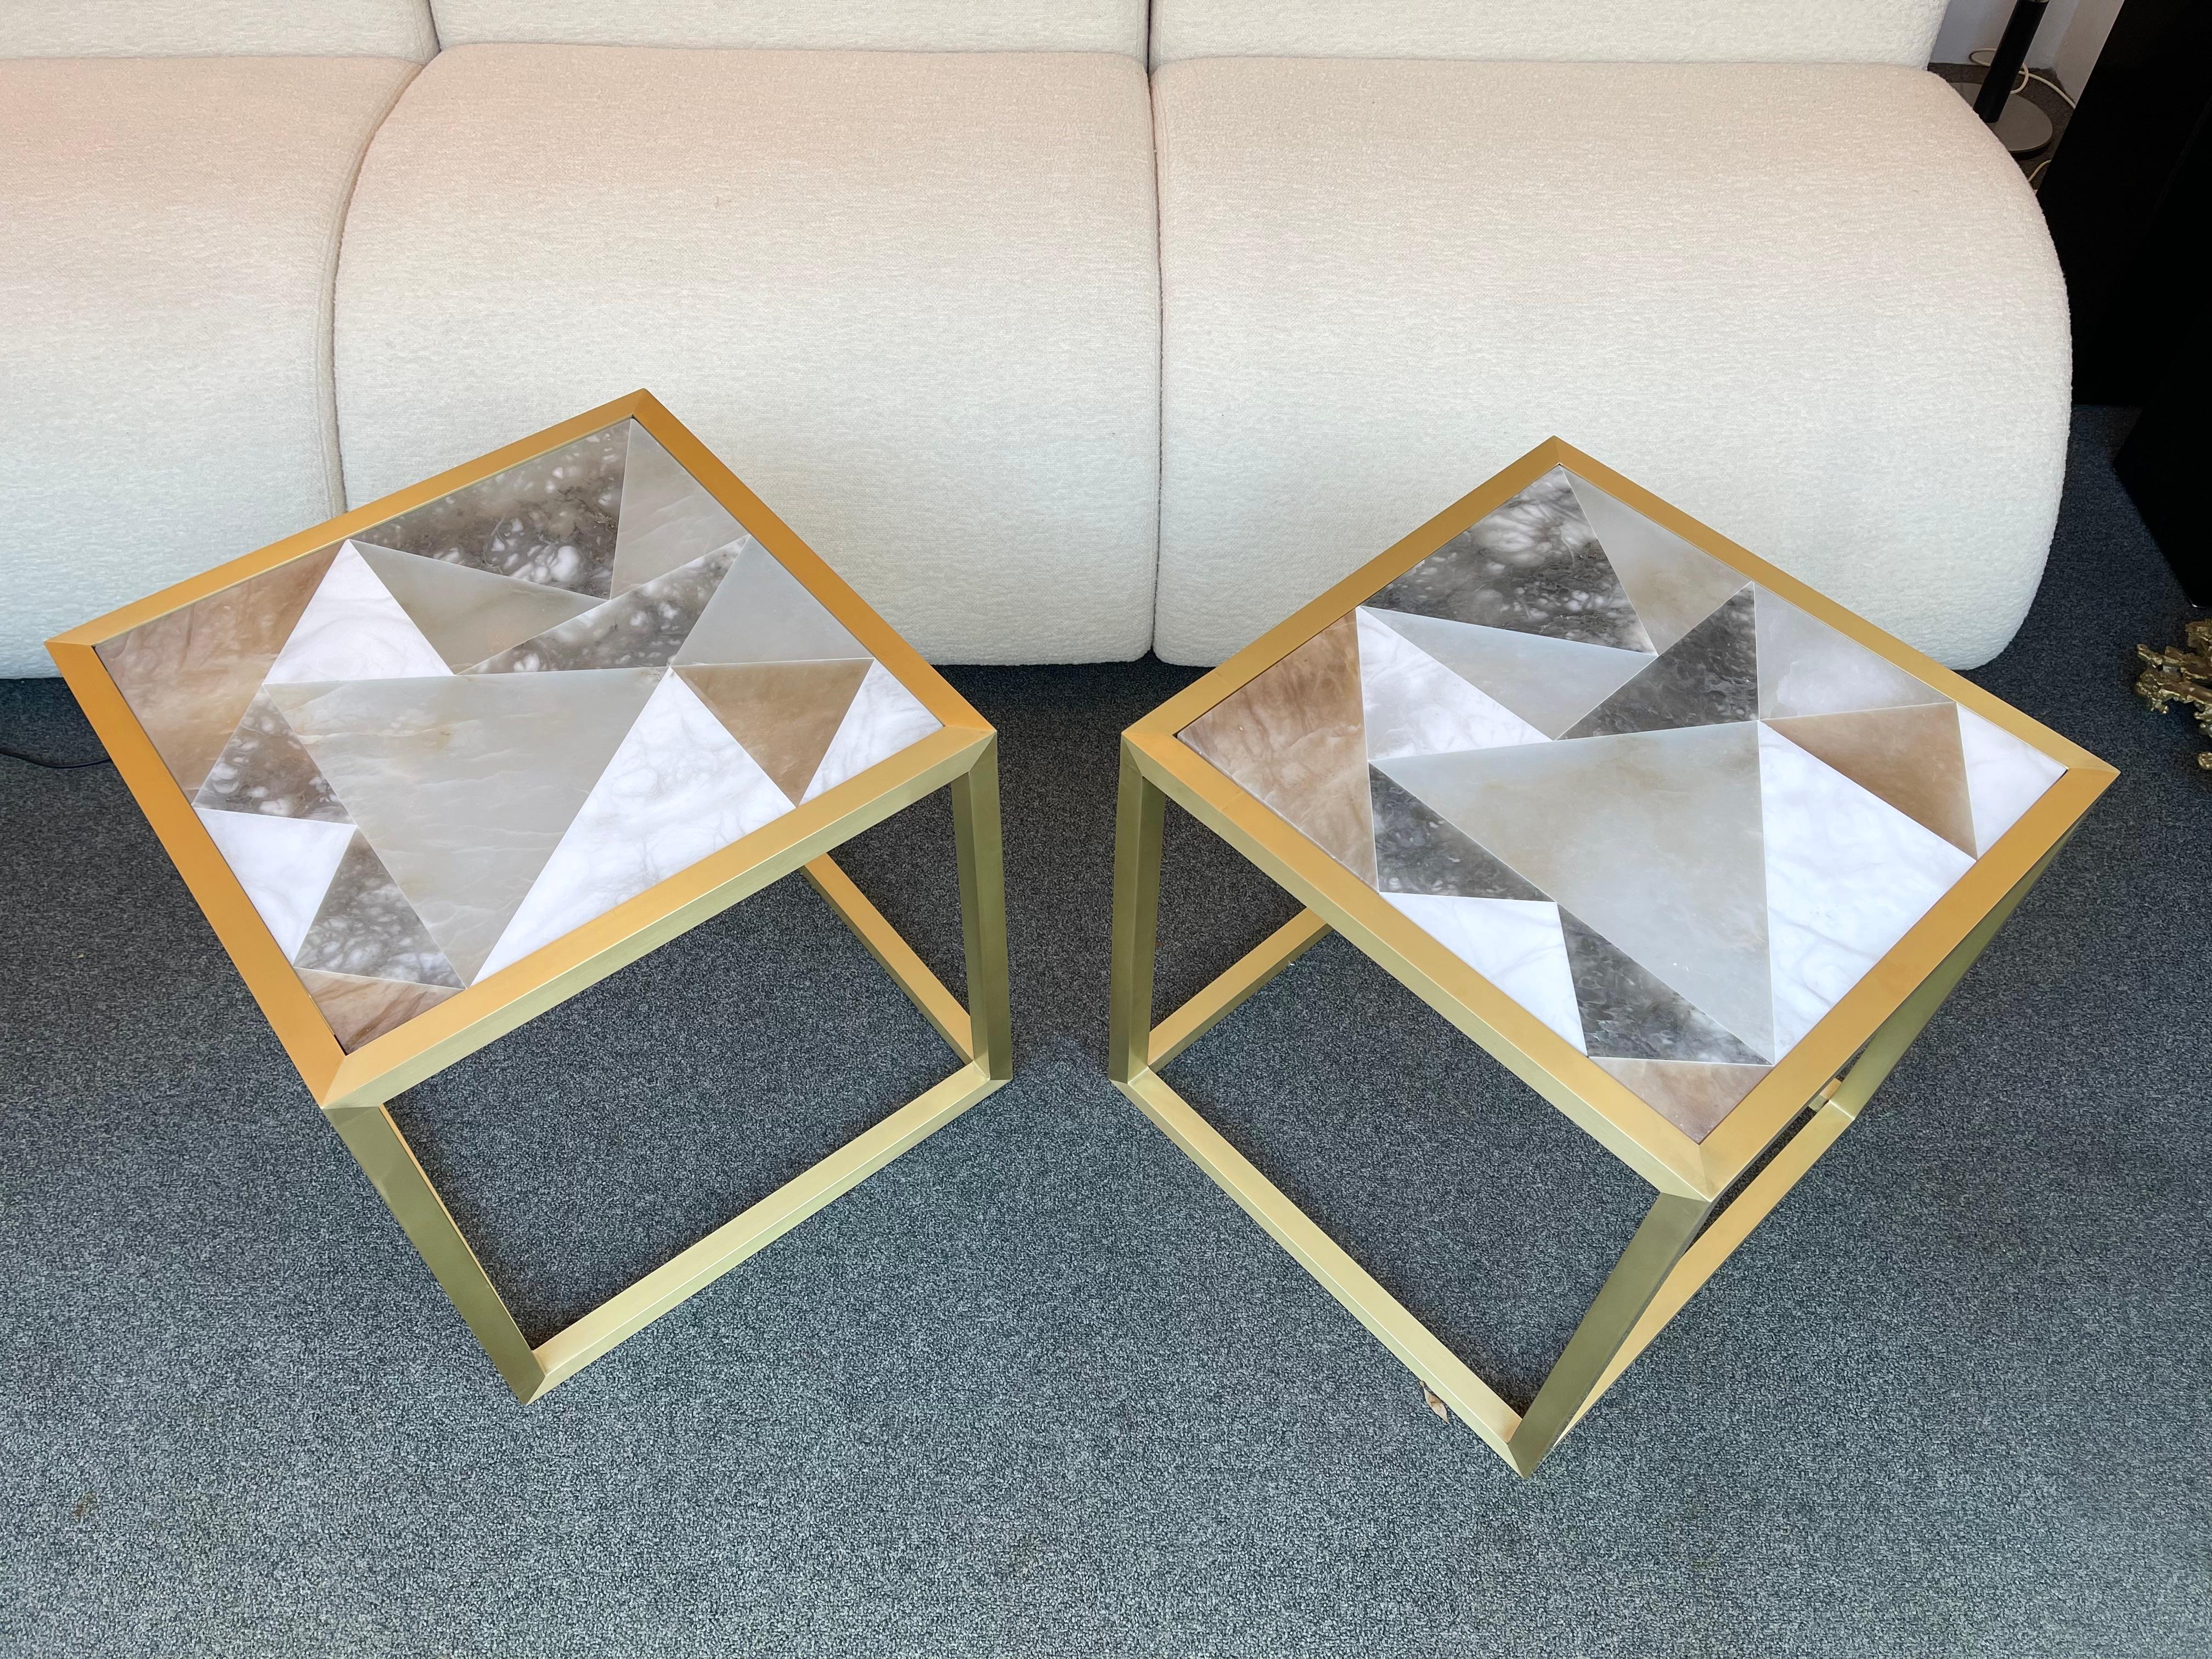 Pair of side end low coffee cocktail bedside cube tables or night stands in satin brass and alabaster marquetry by the Italian artist design Antonio Cagianelli. Edition Stanislas Reboul gallery, limited 10 exemplary. Some of Cagianelli work are